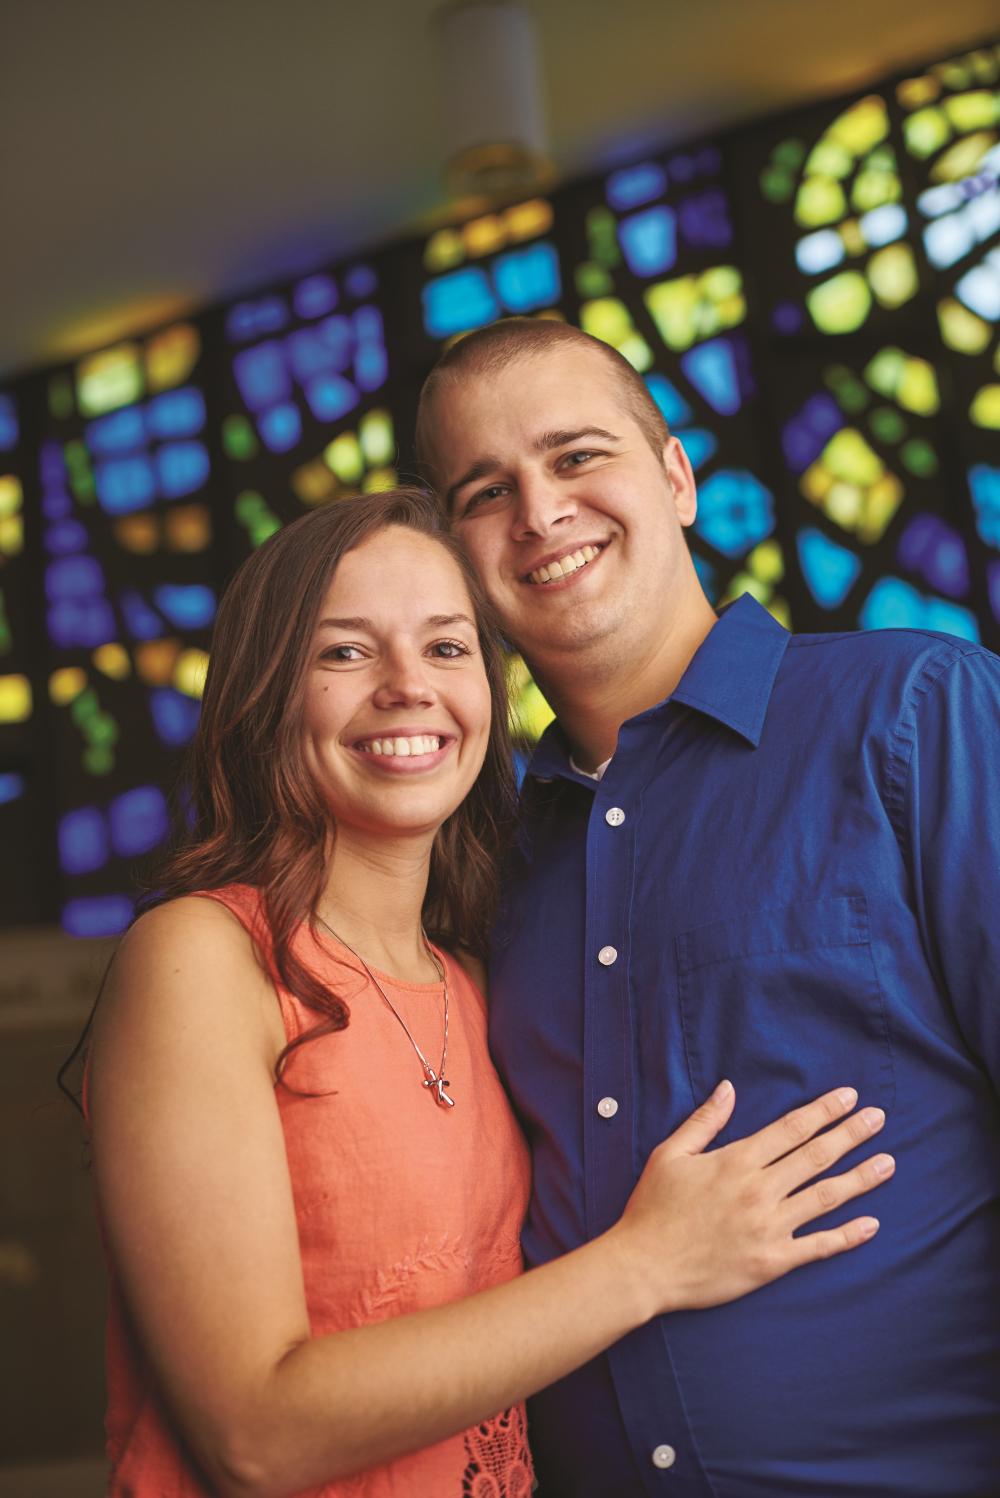 Jeff grew in his faith – and met his wife – at DYLC